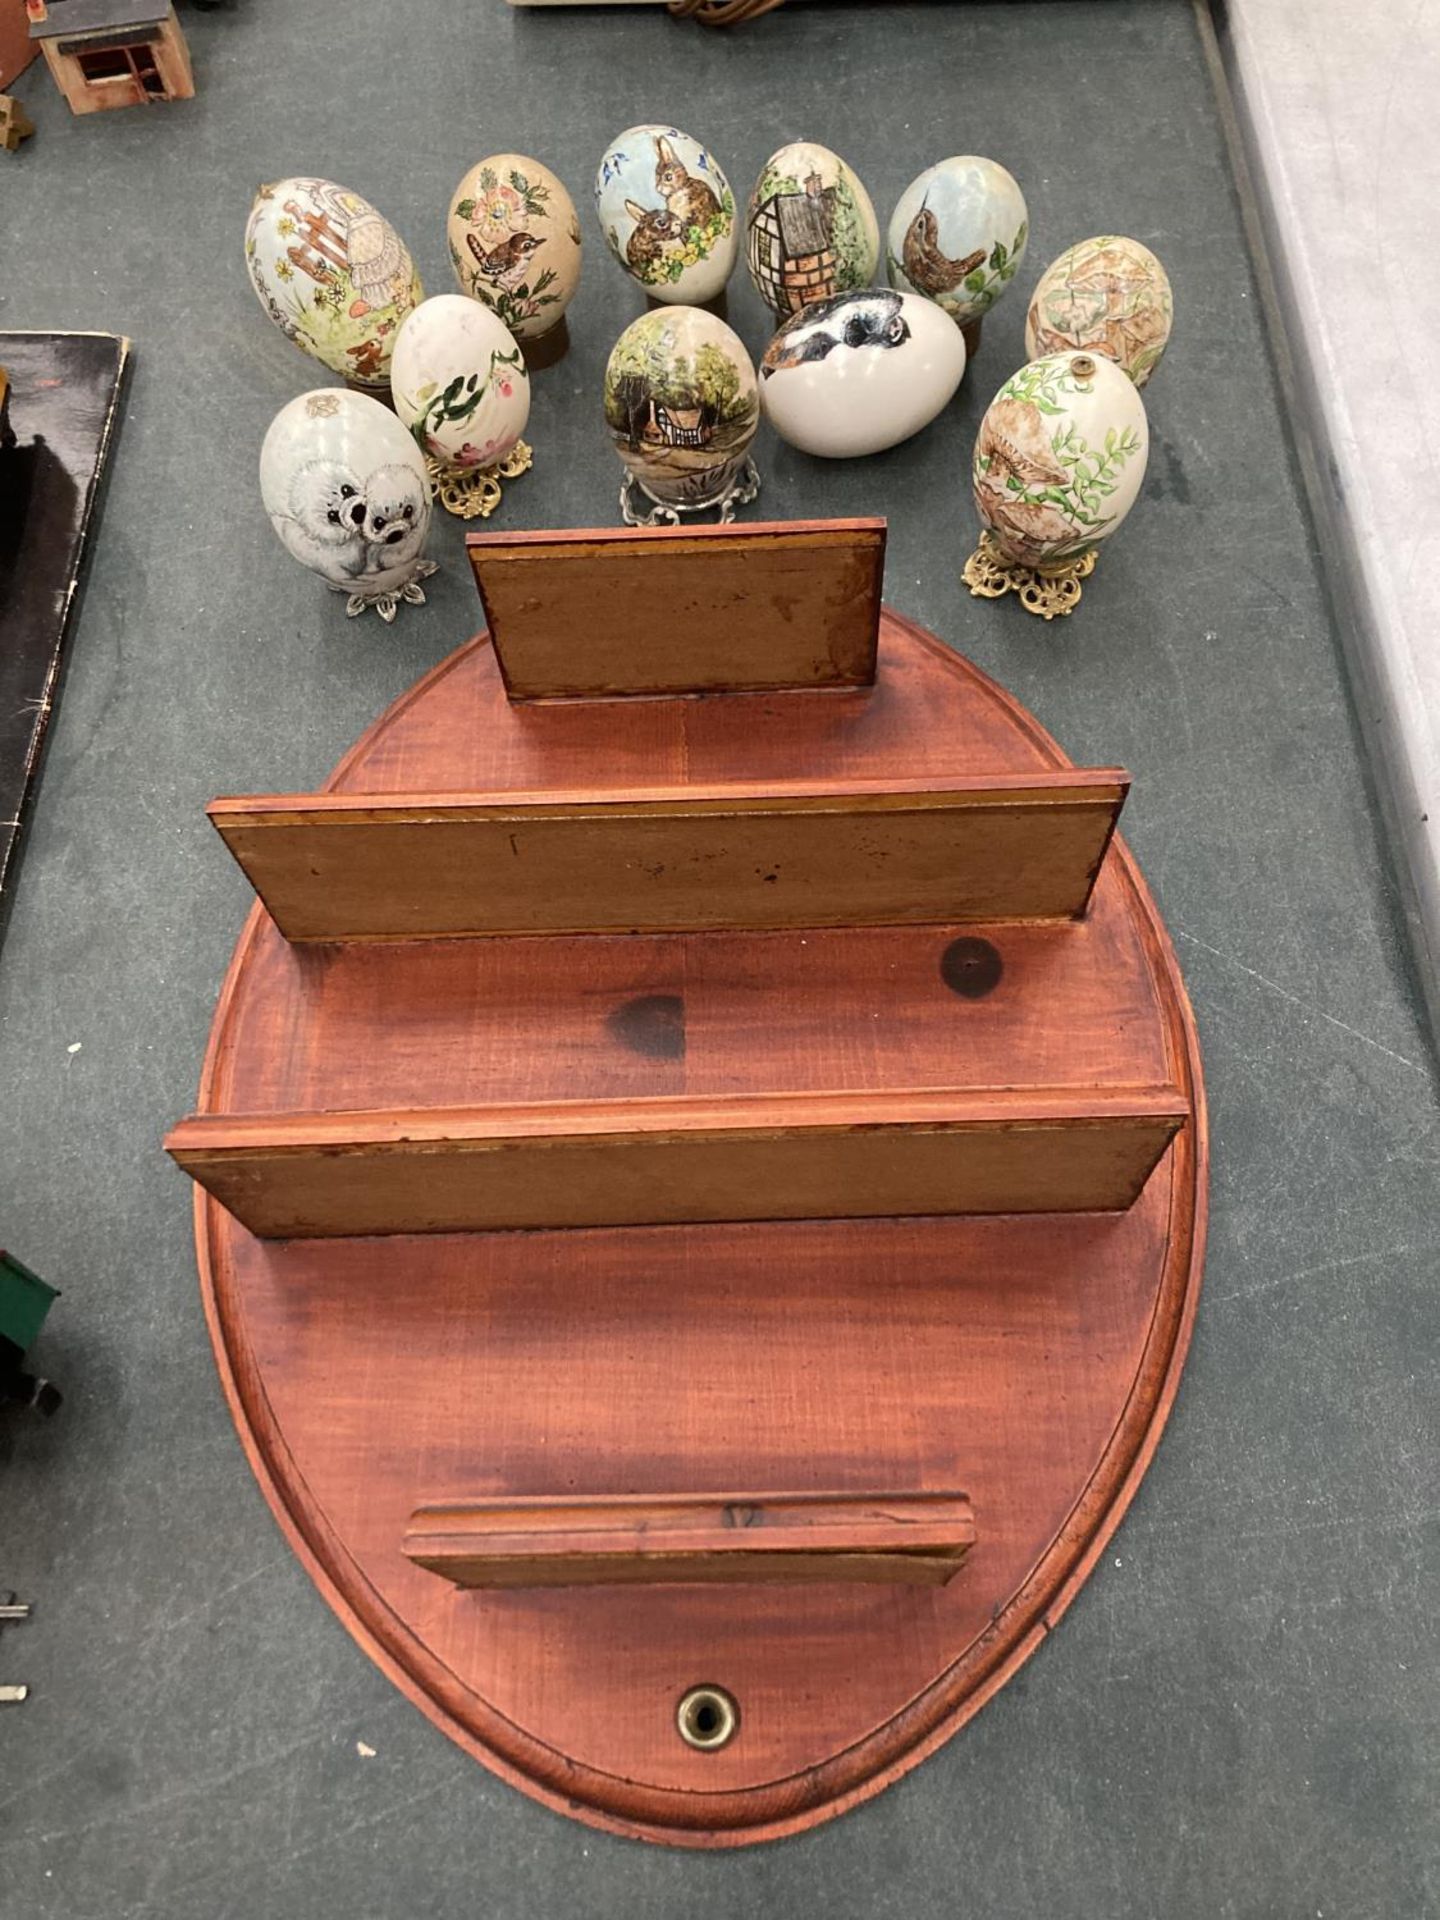 A WOODEN DISPLAY SHELF WITH A QUANTITY OF PAINTED EGGS - Image 2 of 4